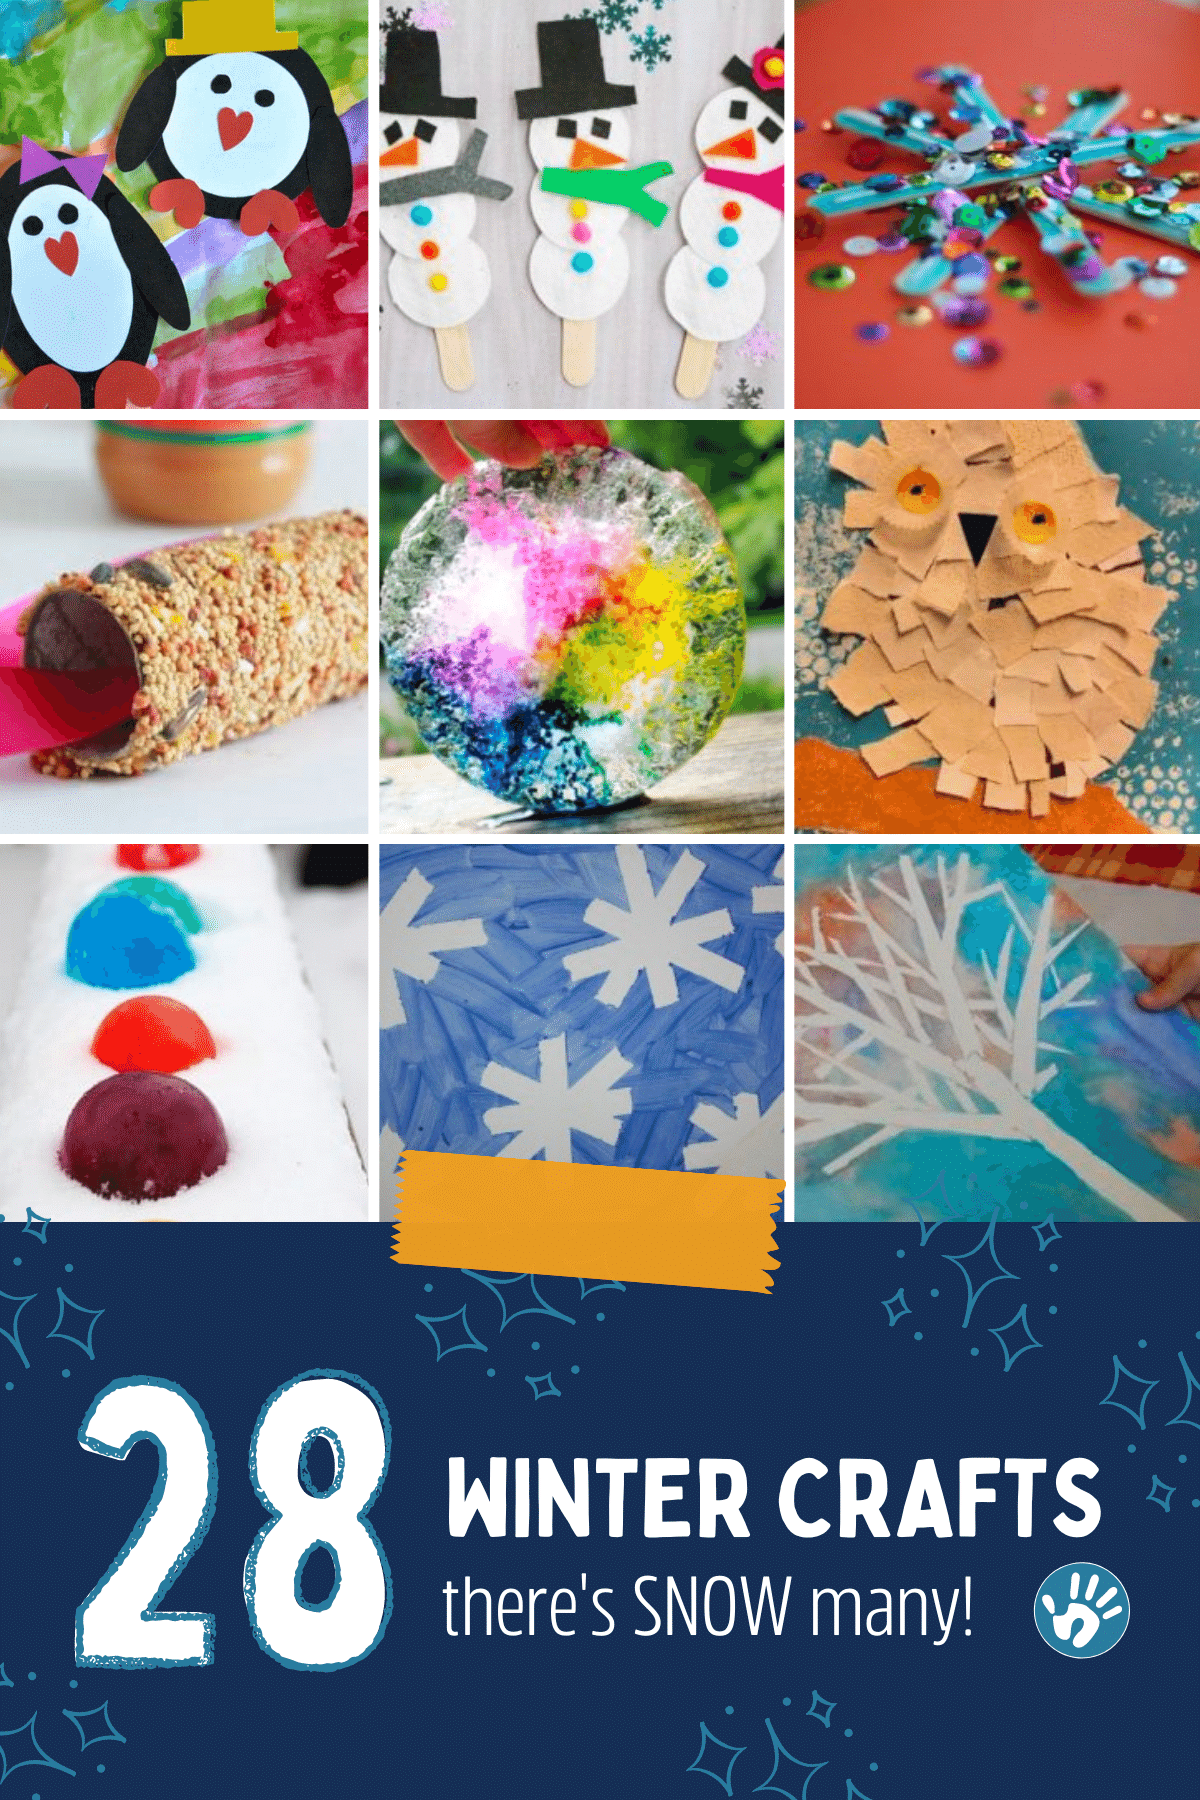 https://handsonaswegrow.com/wp-content/uploads/2021/12/28-more-winter-crafts-2x3-Feature-Image-Templates-for-HOAWG-Roundups-New-Brand.png